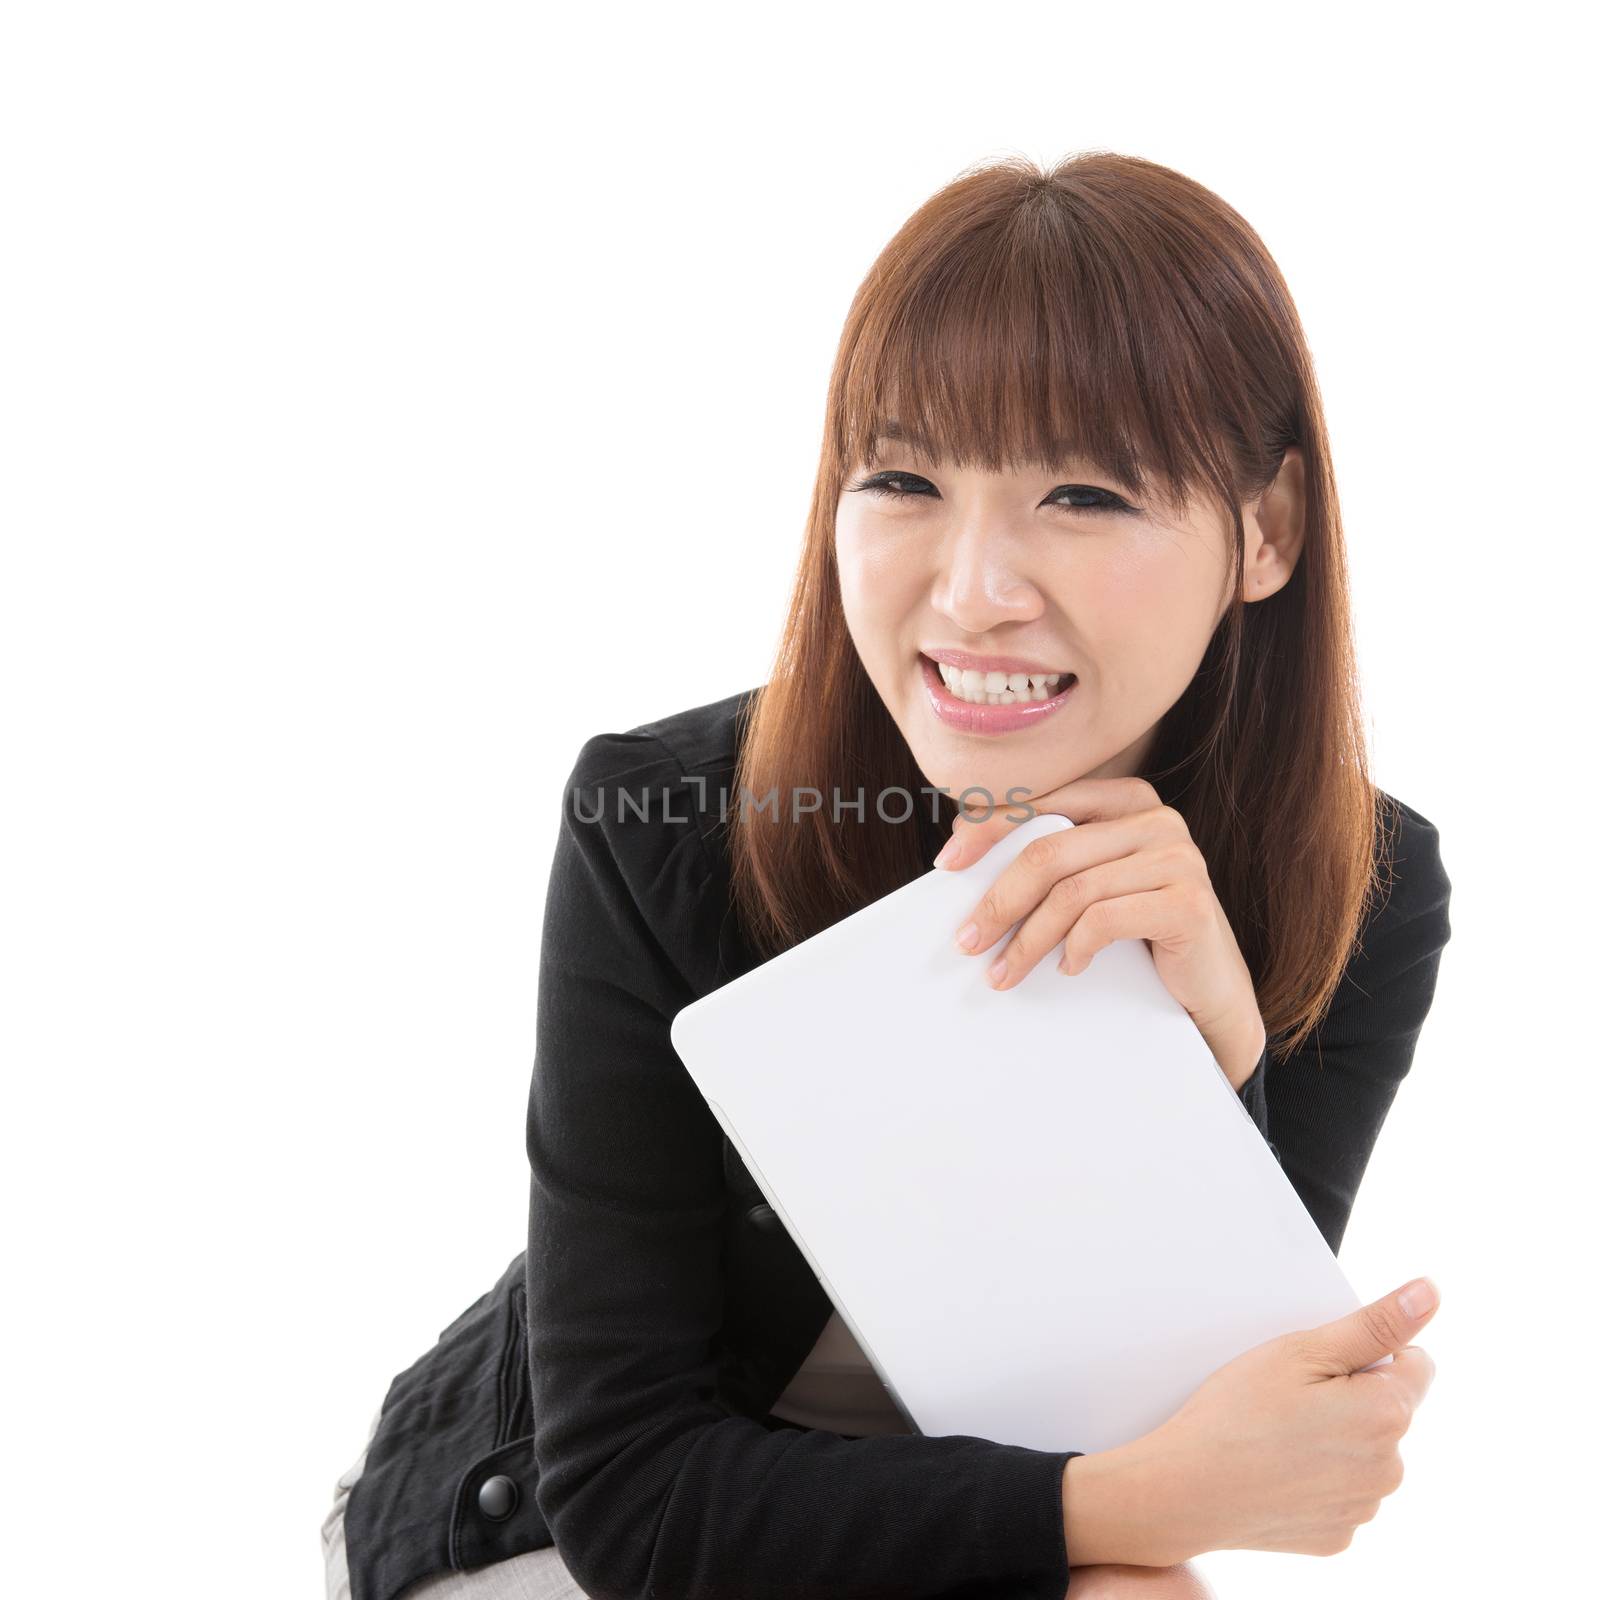 Young Asian girl holding digital computer tablet and smiling, isolated on white background.